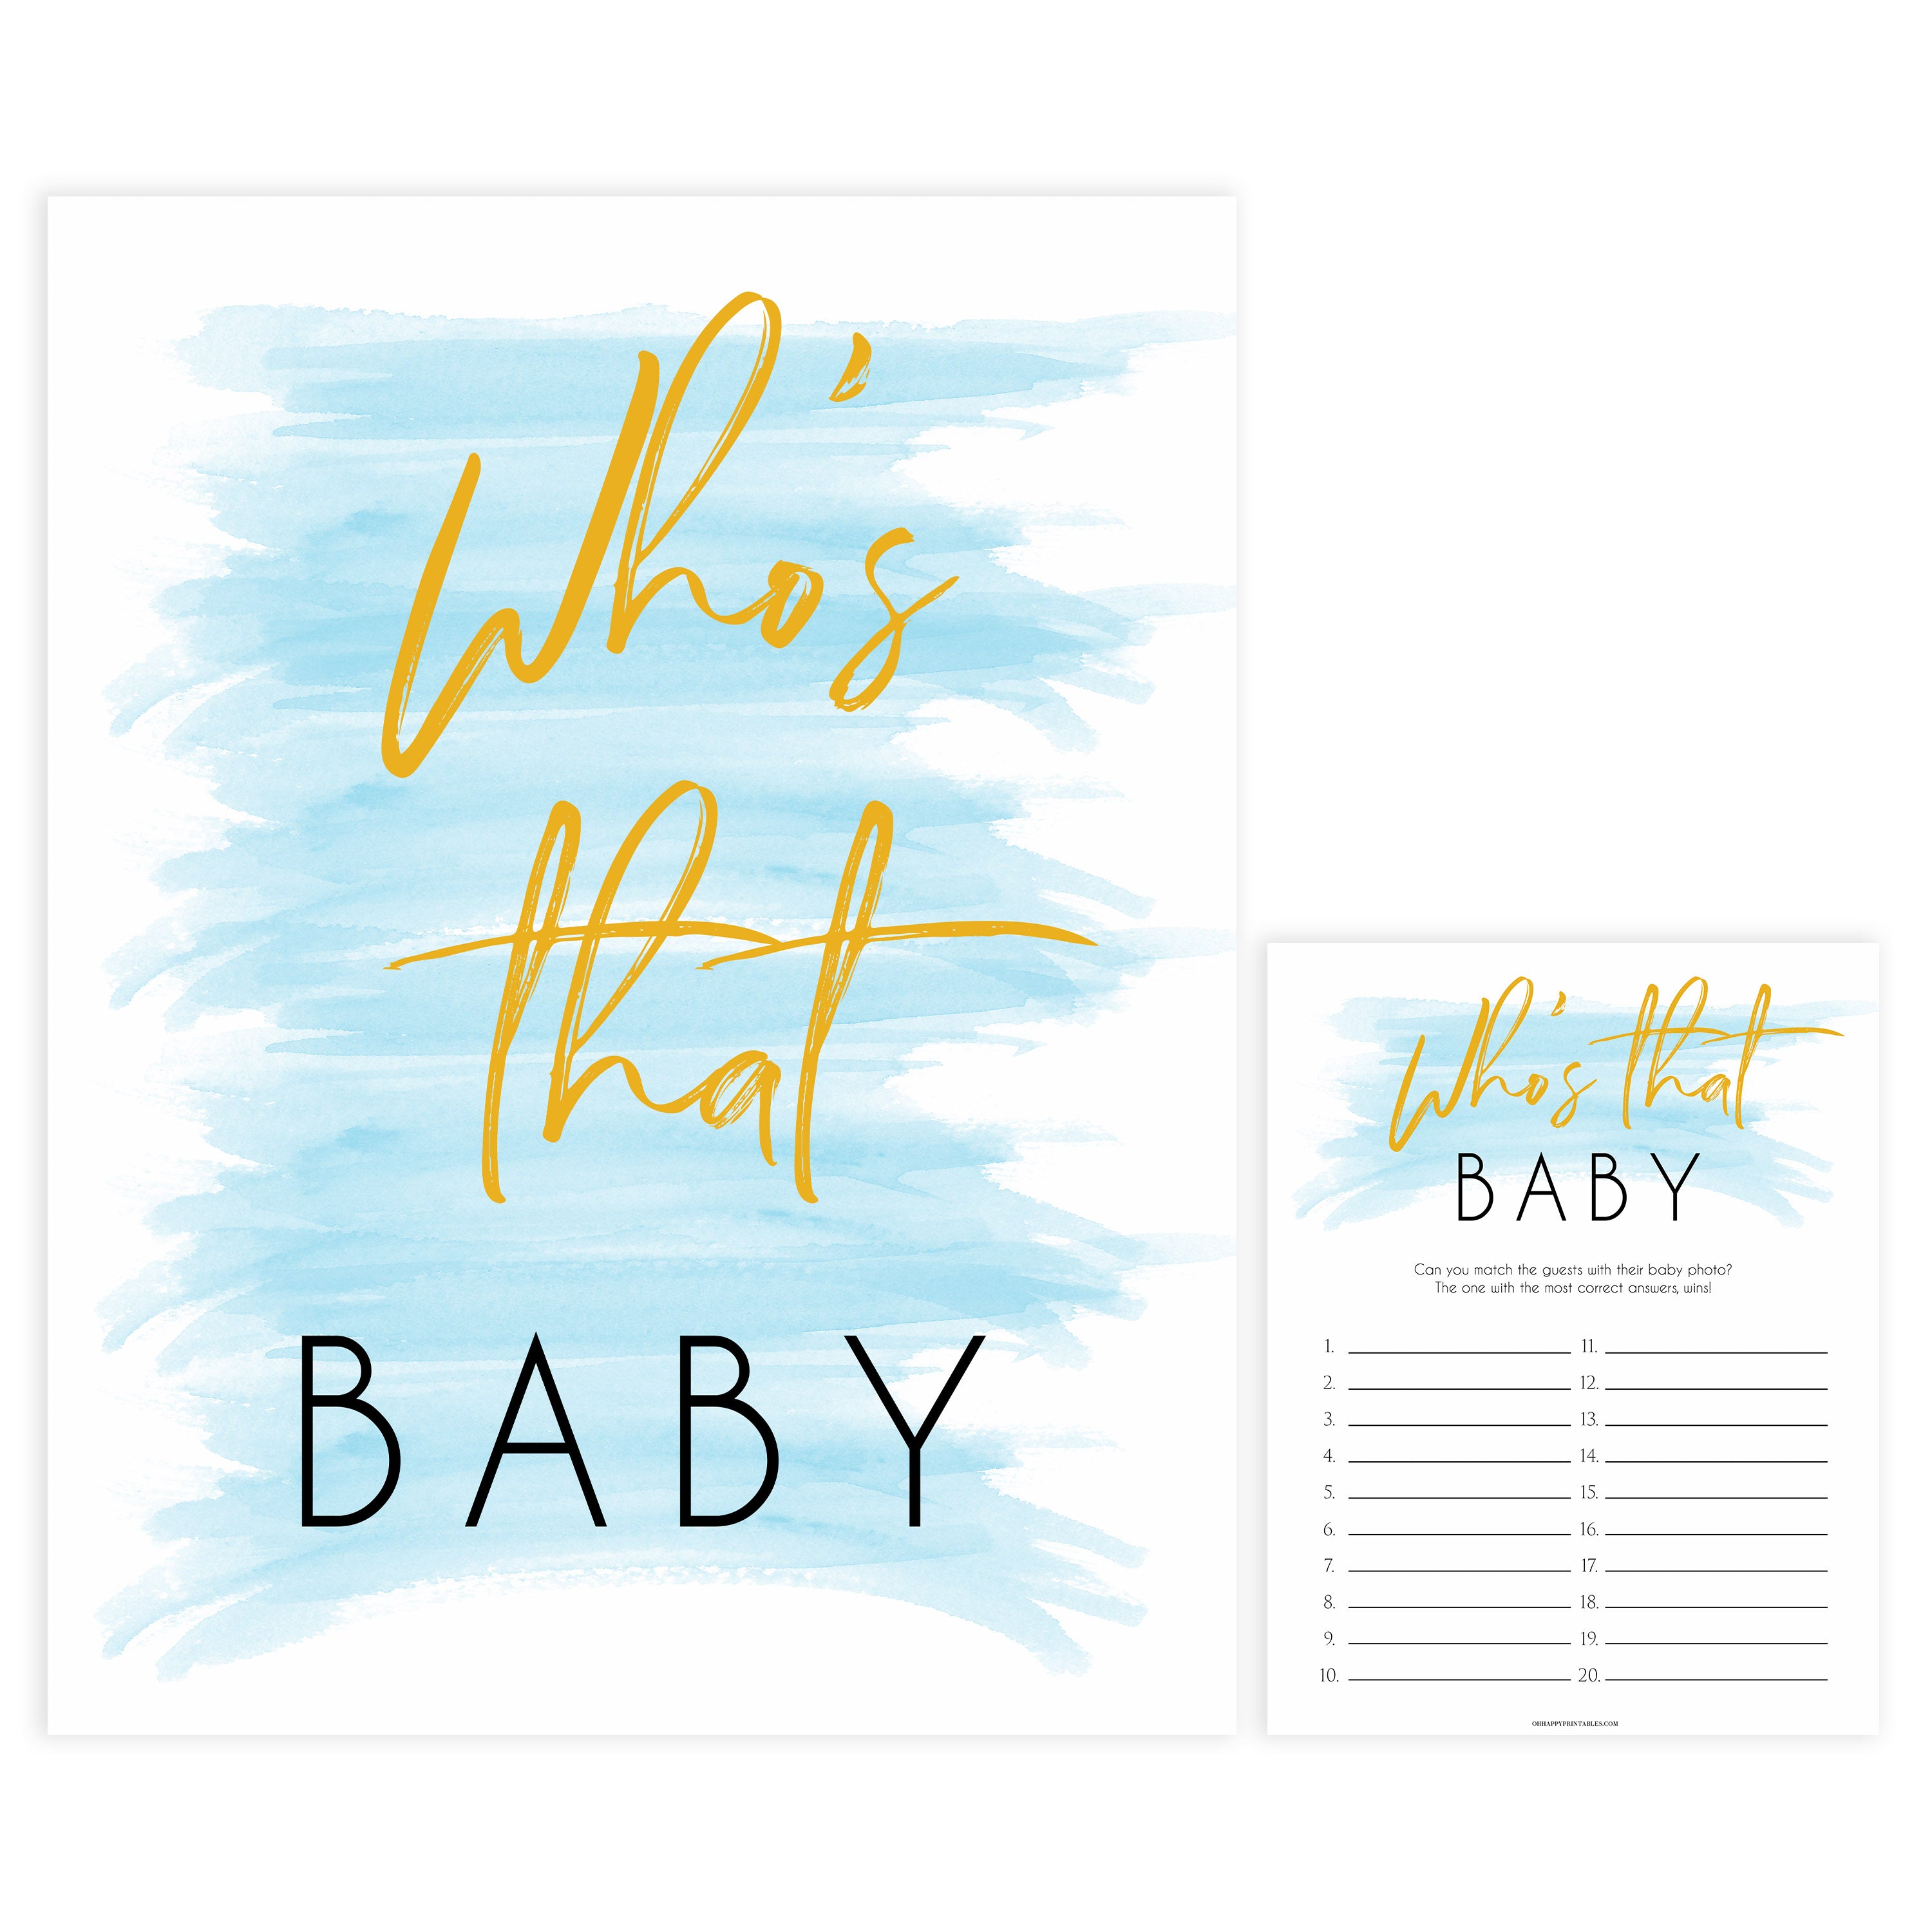 whos that baby game, guess the baby picture, printable baby games, blue baby shower games, fun baby game ideas